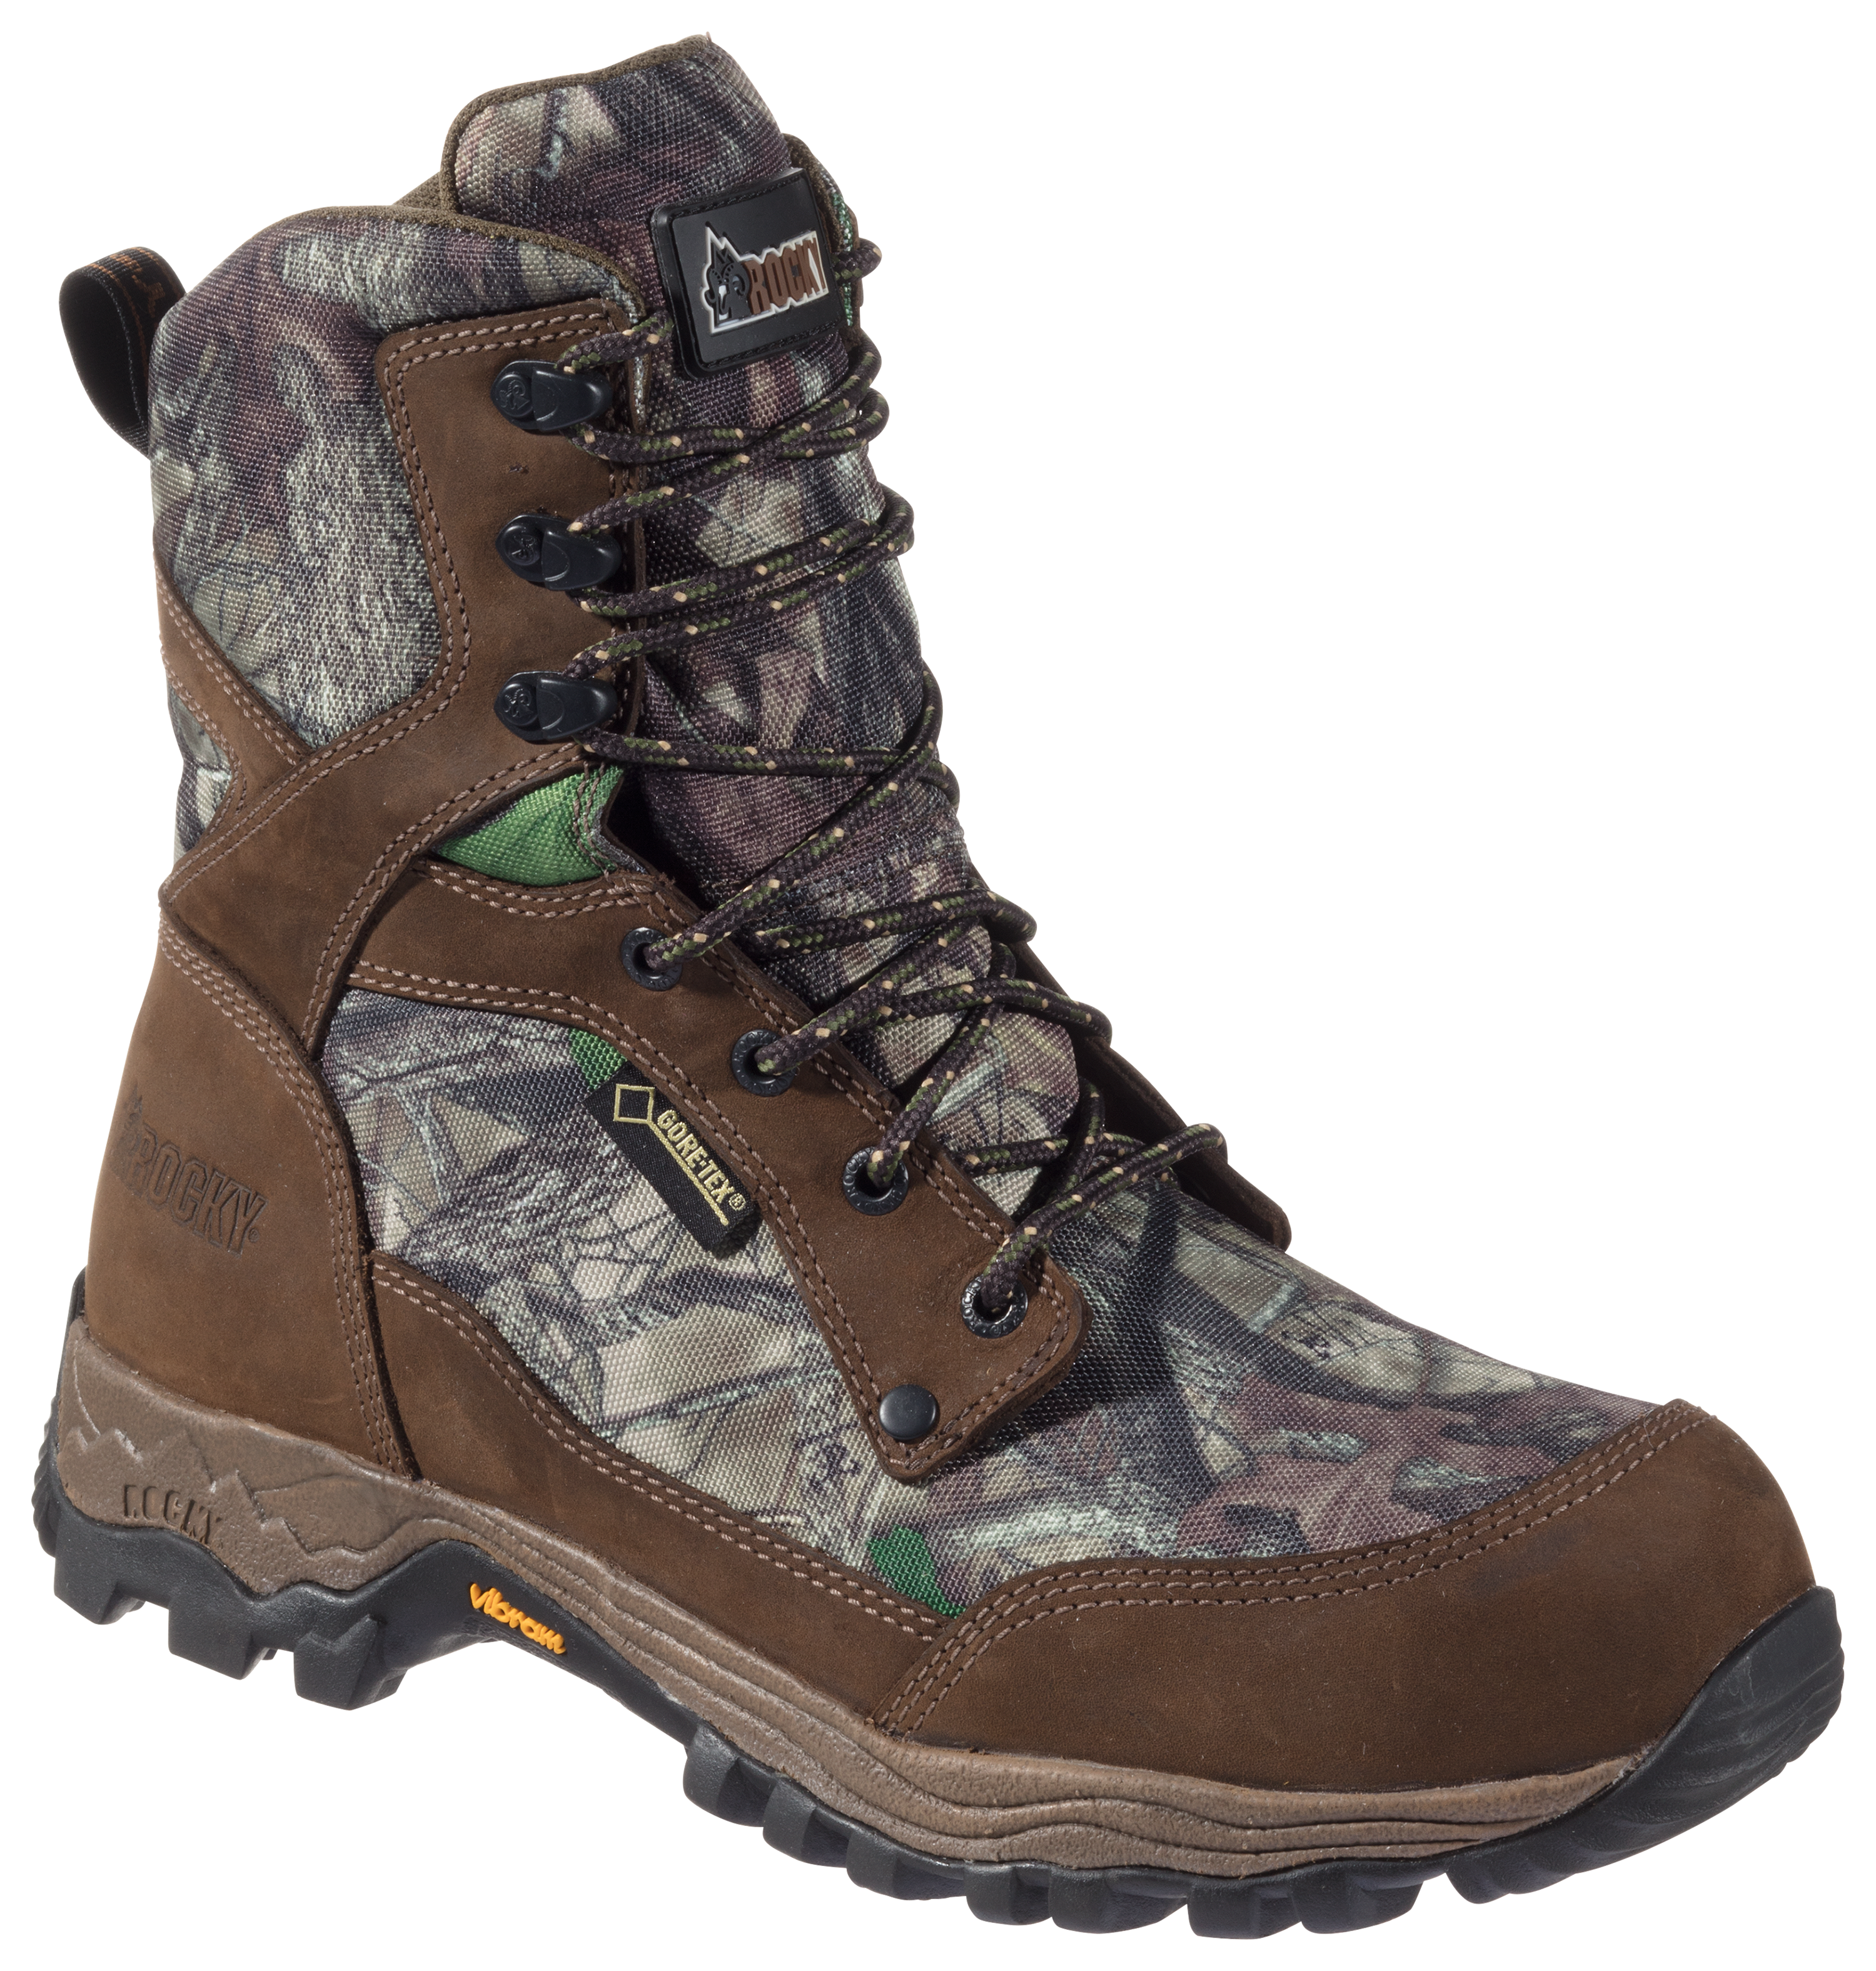 ROCKY ProHunter GORE-TEX Insulated Hunting Boots for Men | Bass Pro Shops